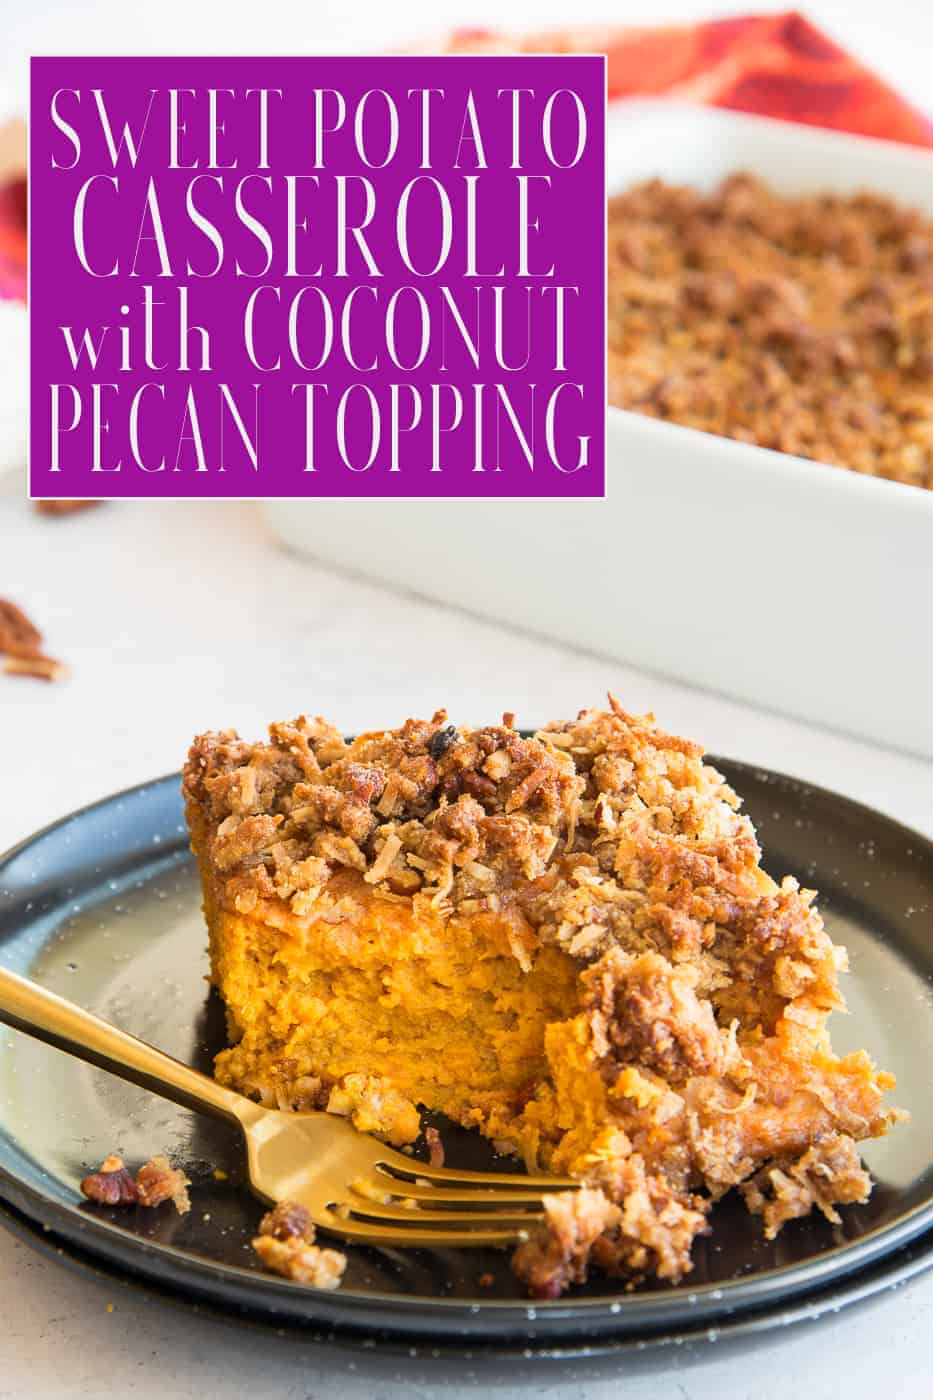 Sweet Potato Casserole with Coconut Pecan Topping switches up the traditional recipe and gives it a nuttier, more tropical flavor. It's full of flavor with pumpkin pie spice, gluten-free and vegetarian. This recipe is also very freezer-friendly so it’s a great option for those busy holiday meals. #sweetpotato #pecans #coconut #sweetpotatocasserole #holidayrecipe #Thanksgivingrecipe #Christmasrecipe #holidaysidedish #sidedishrecipe #sidedish #sides #makeaheadrecipe via @ediblesense